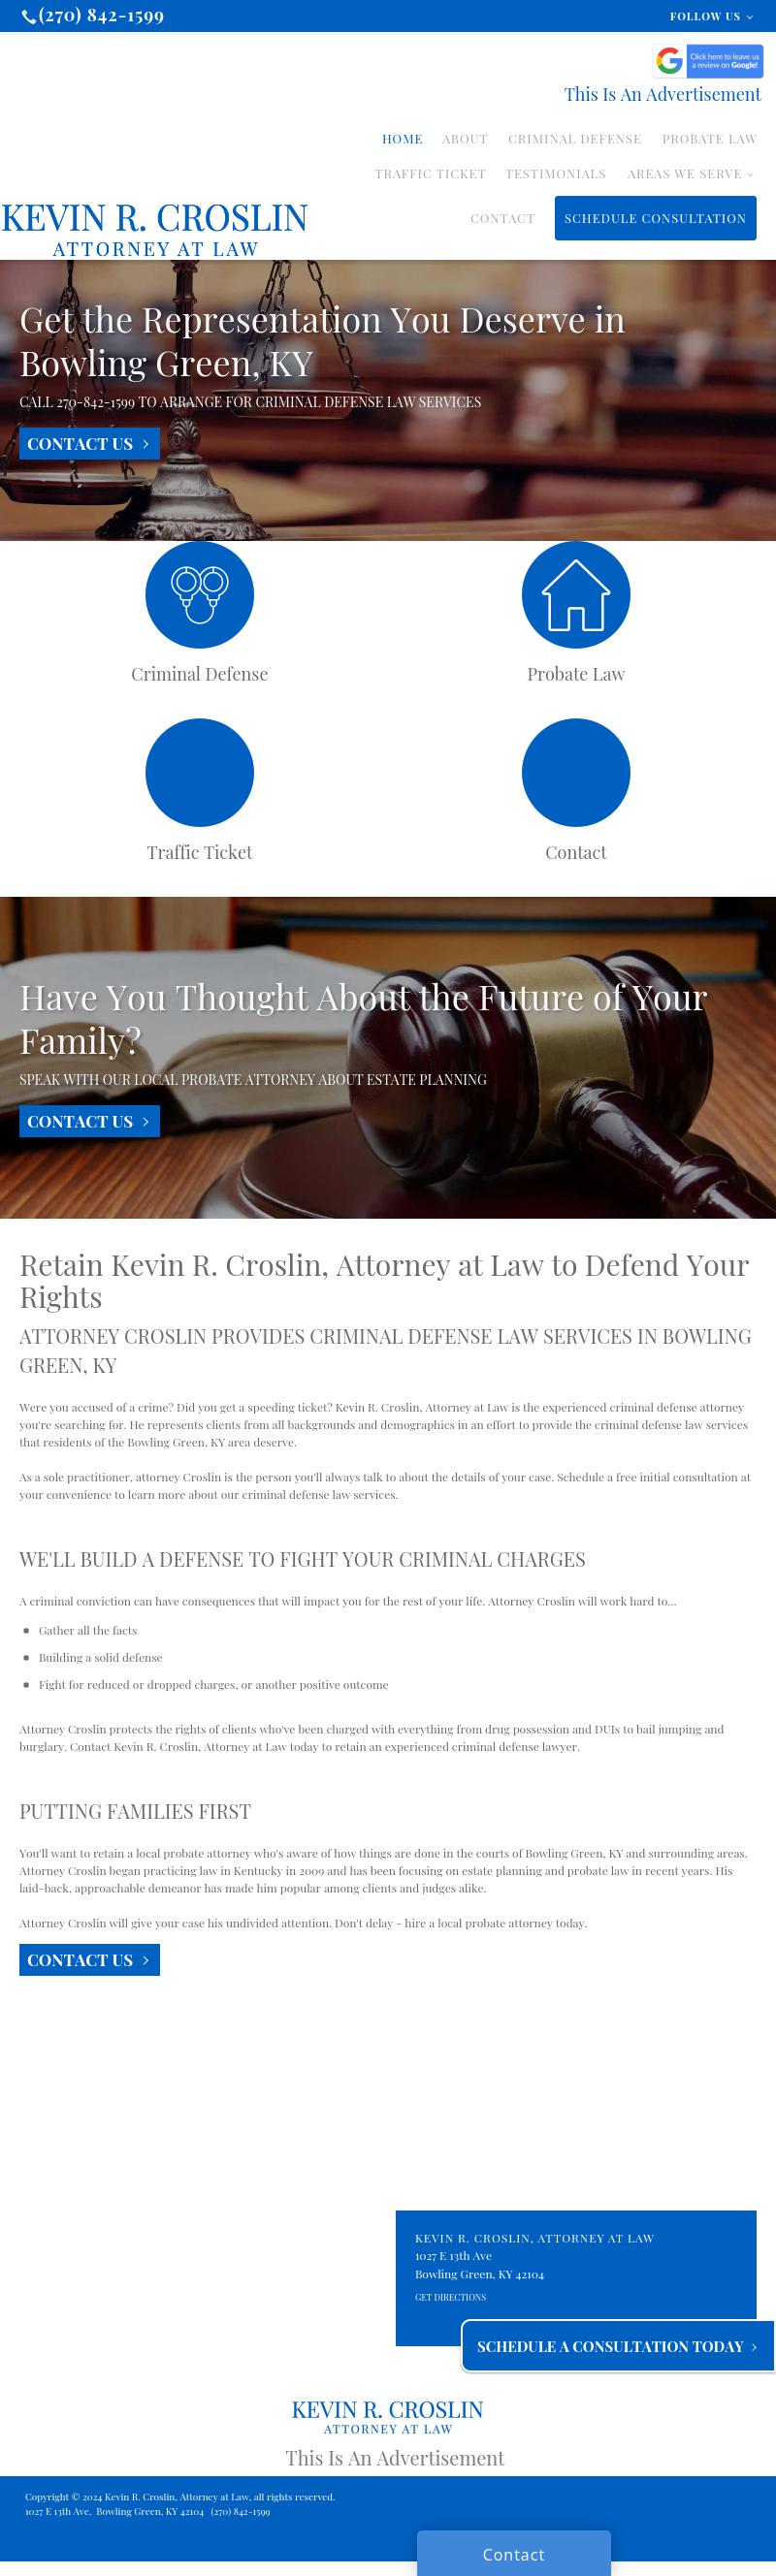 Kevin R. Croslin, Attorney at Law - Bowling Green KY Lawyers